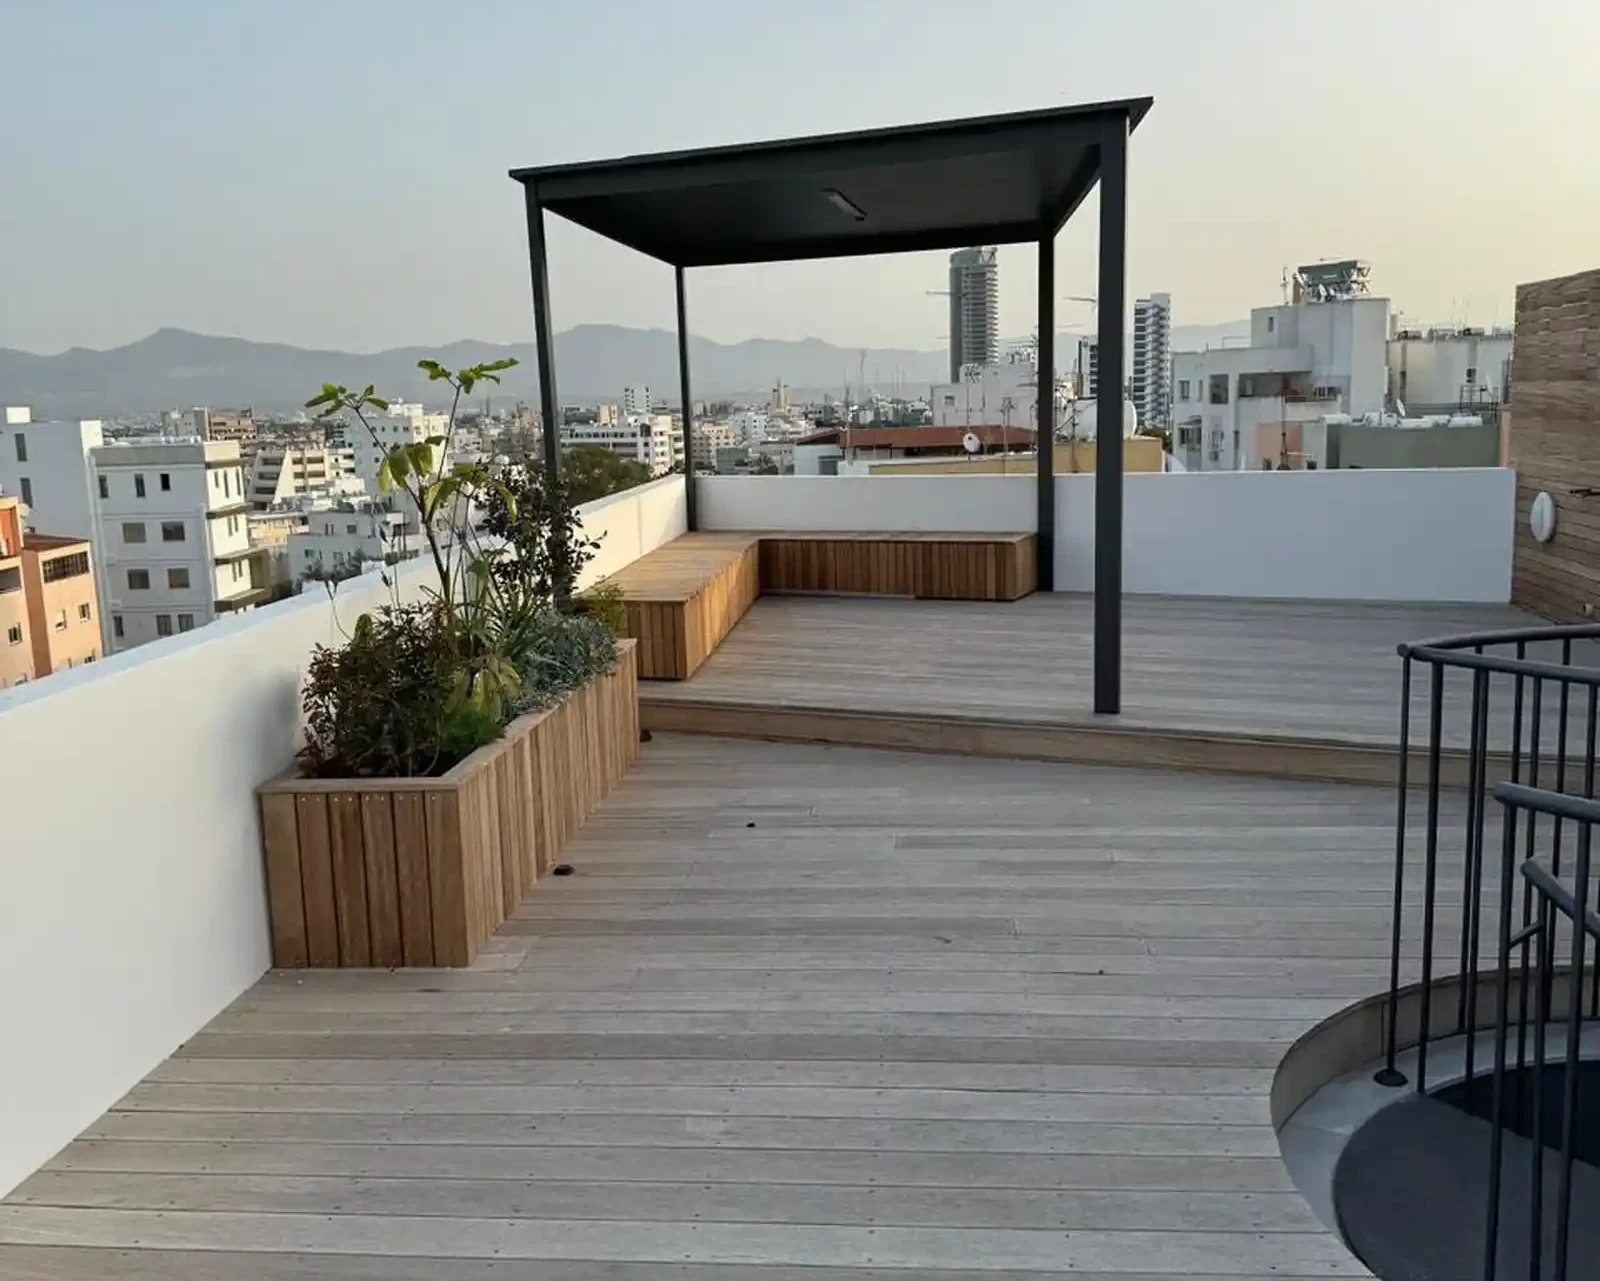 3-bedroom penthouse to rent €2.800, image 1